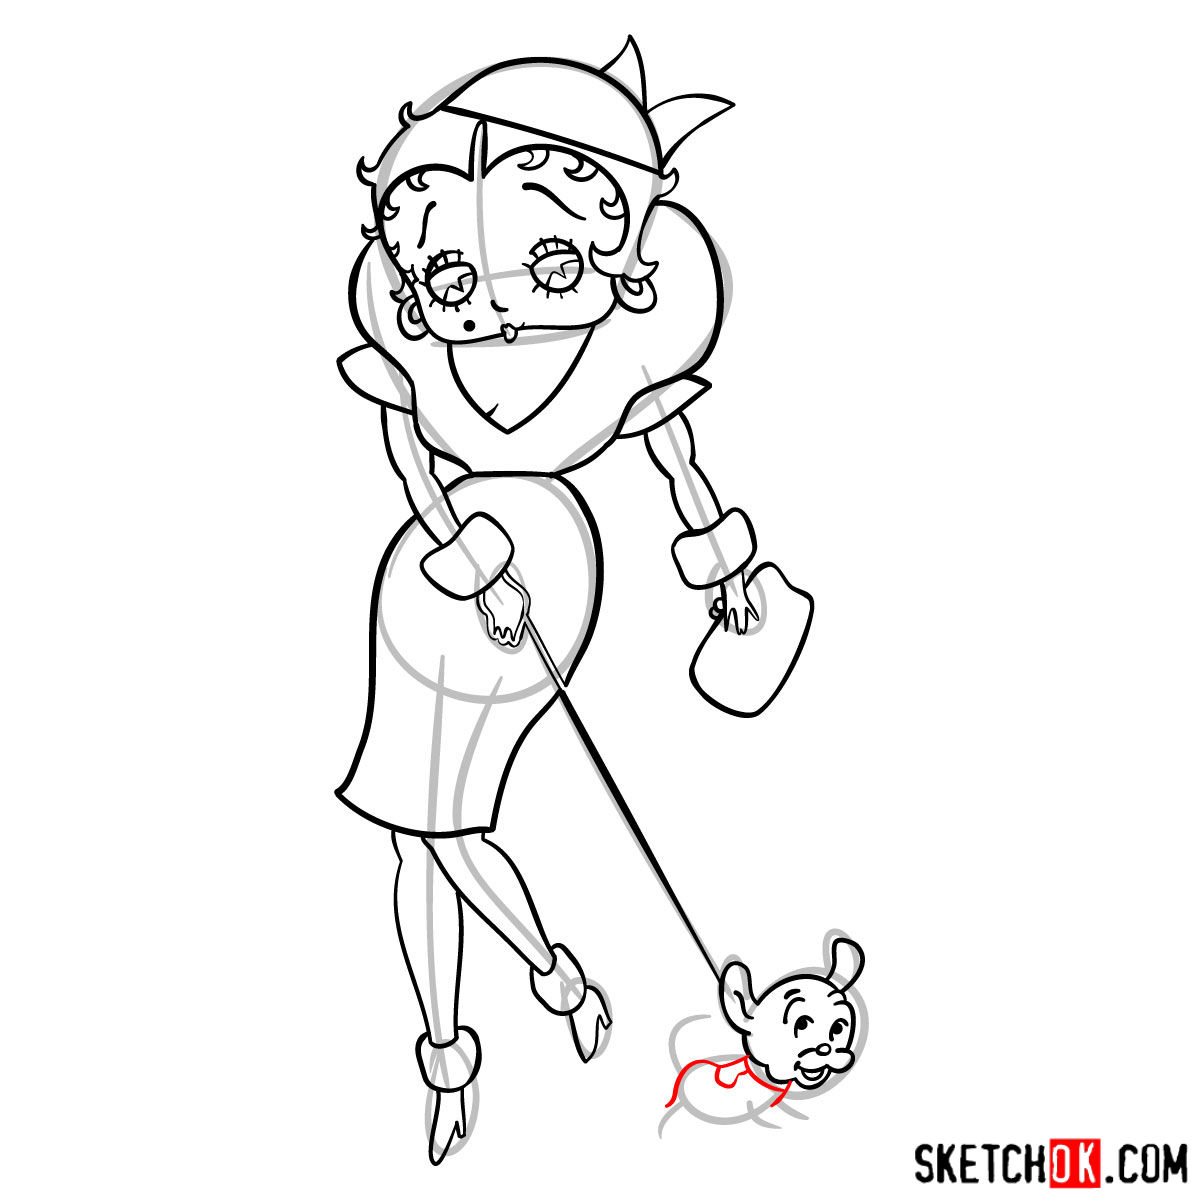 How to draw Betty Boop with her dog - step 14